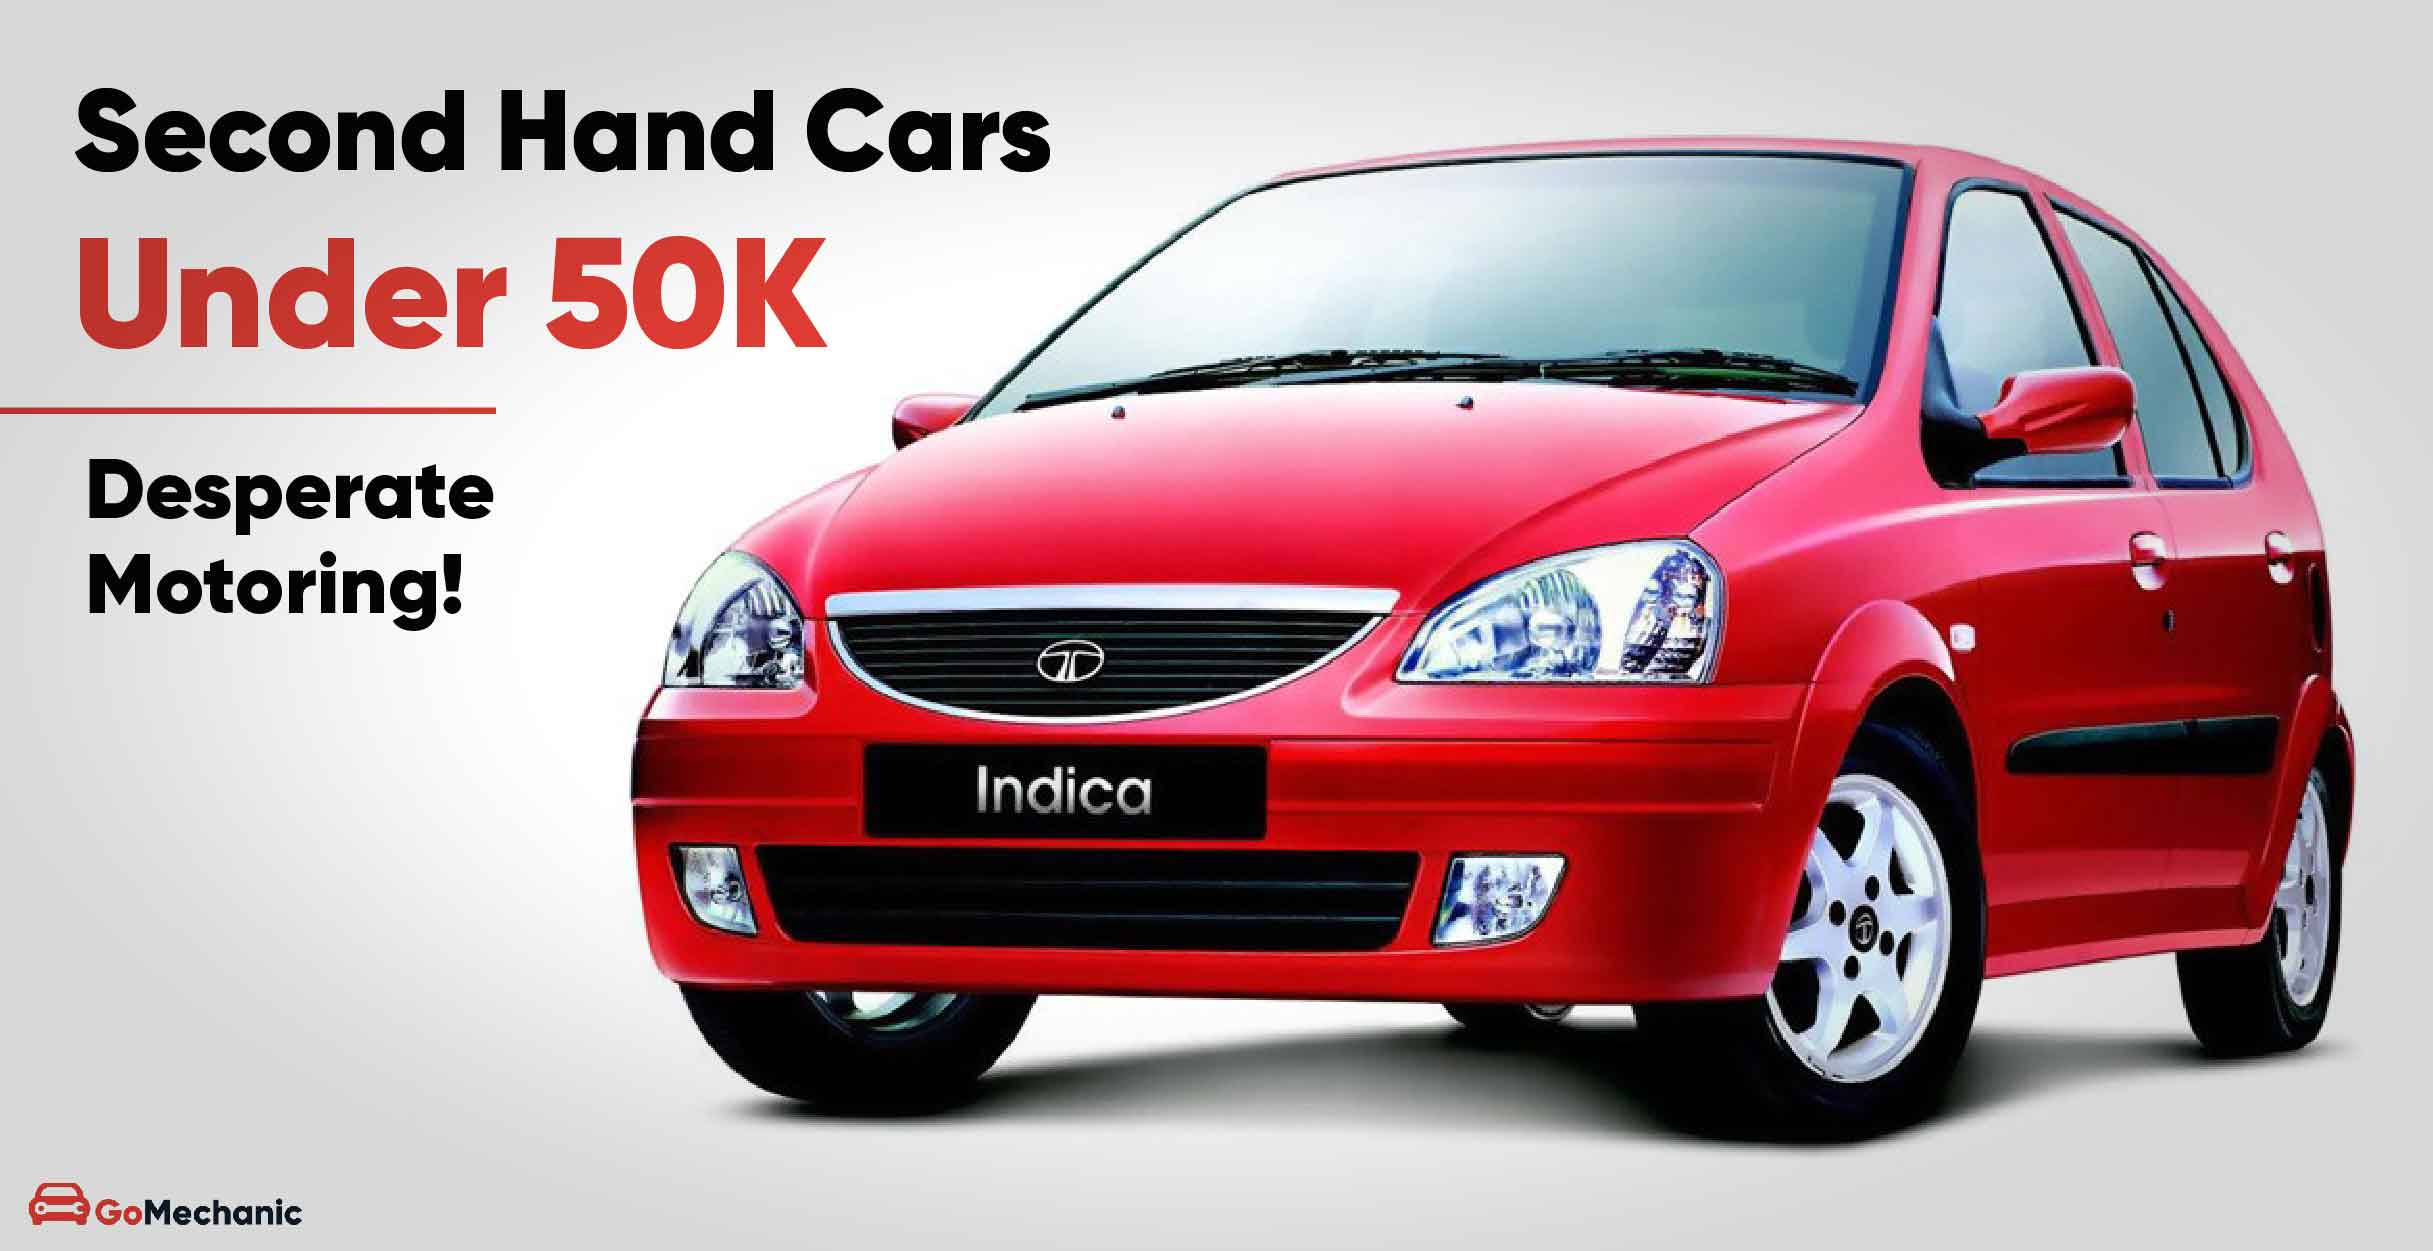 10 best second-hand used cars under 50,000